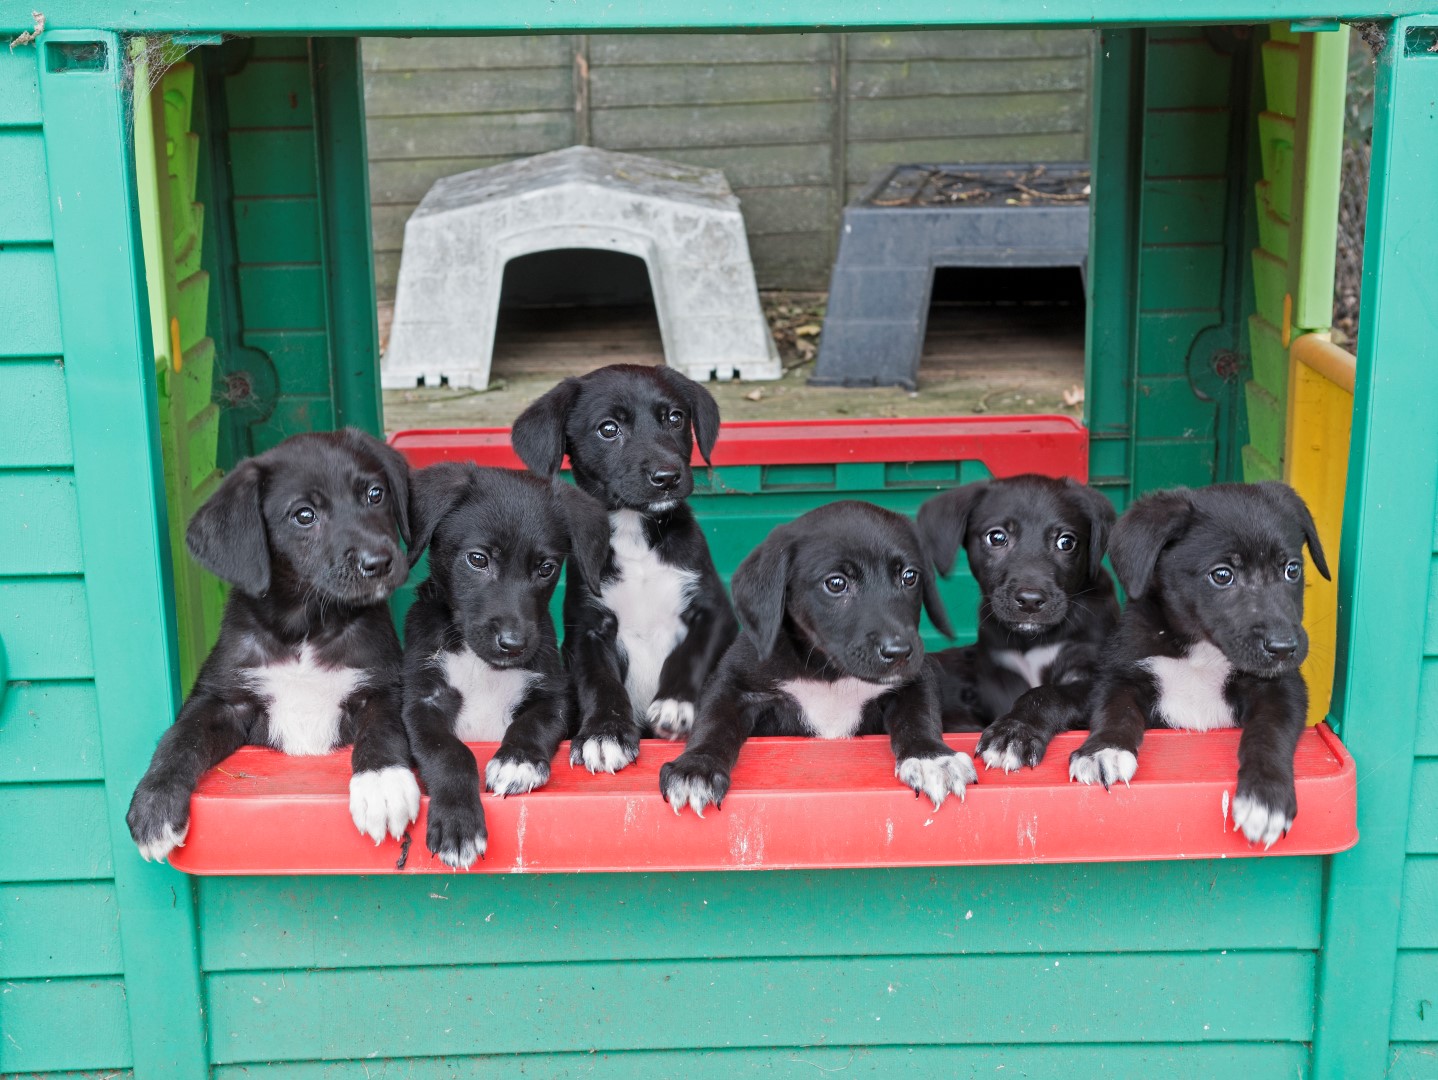 The puppies lined up in a playhouse in the Bromsgrove centre's puppy play area